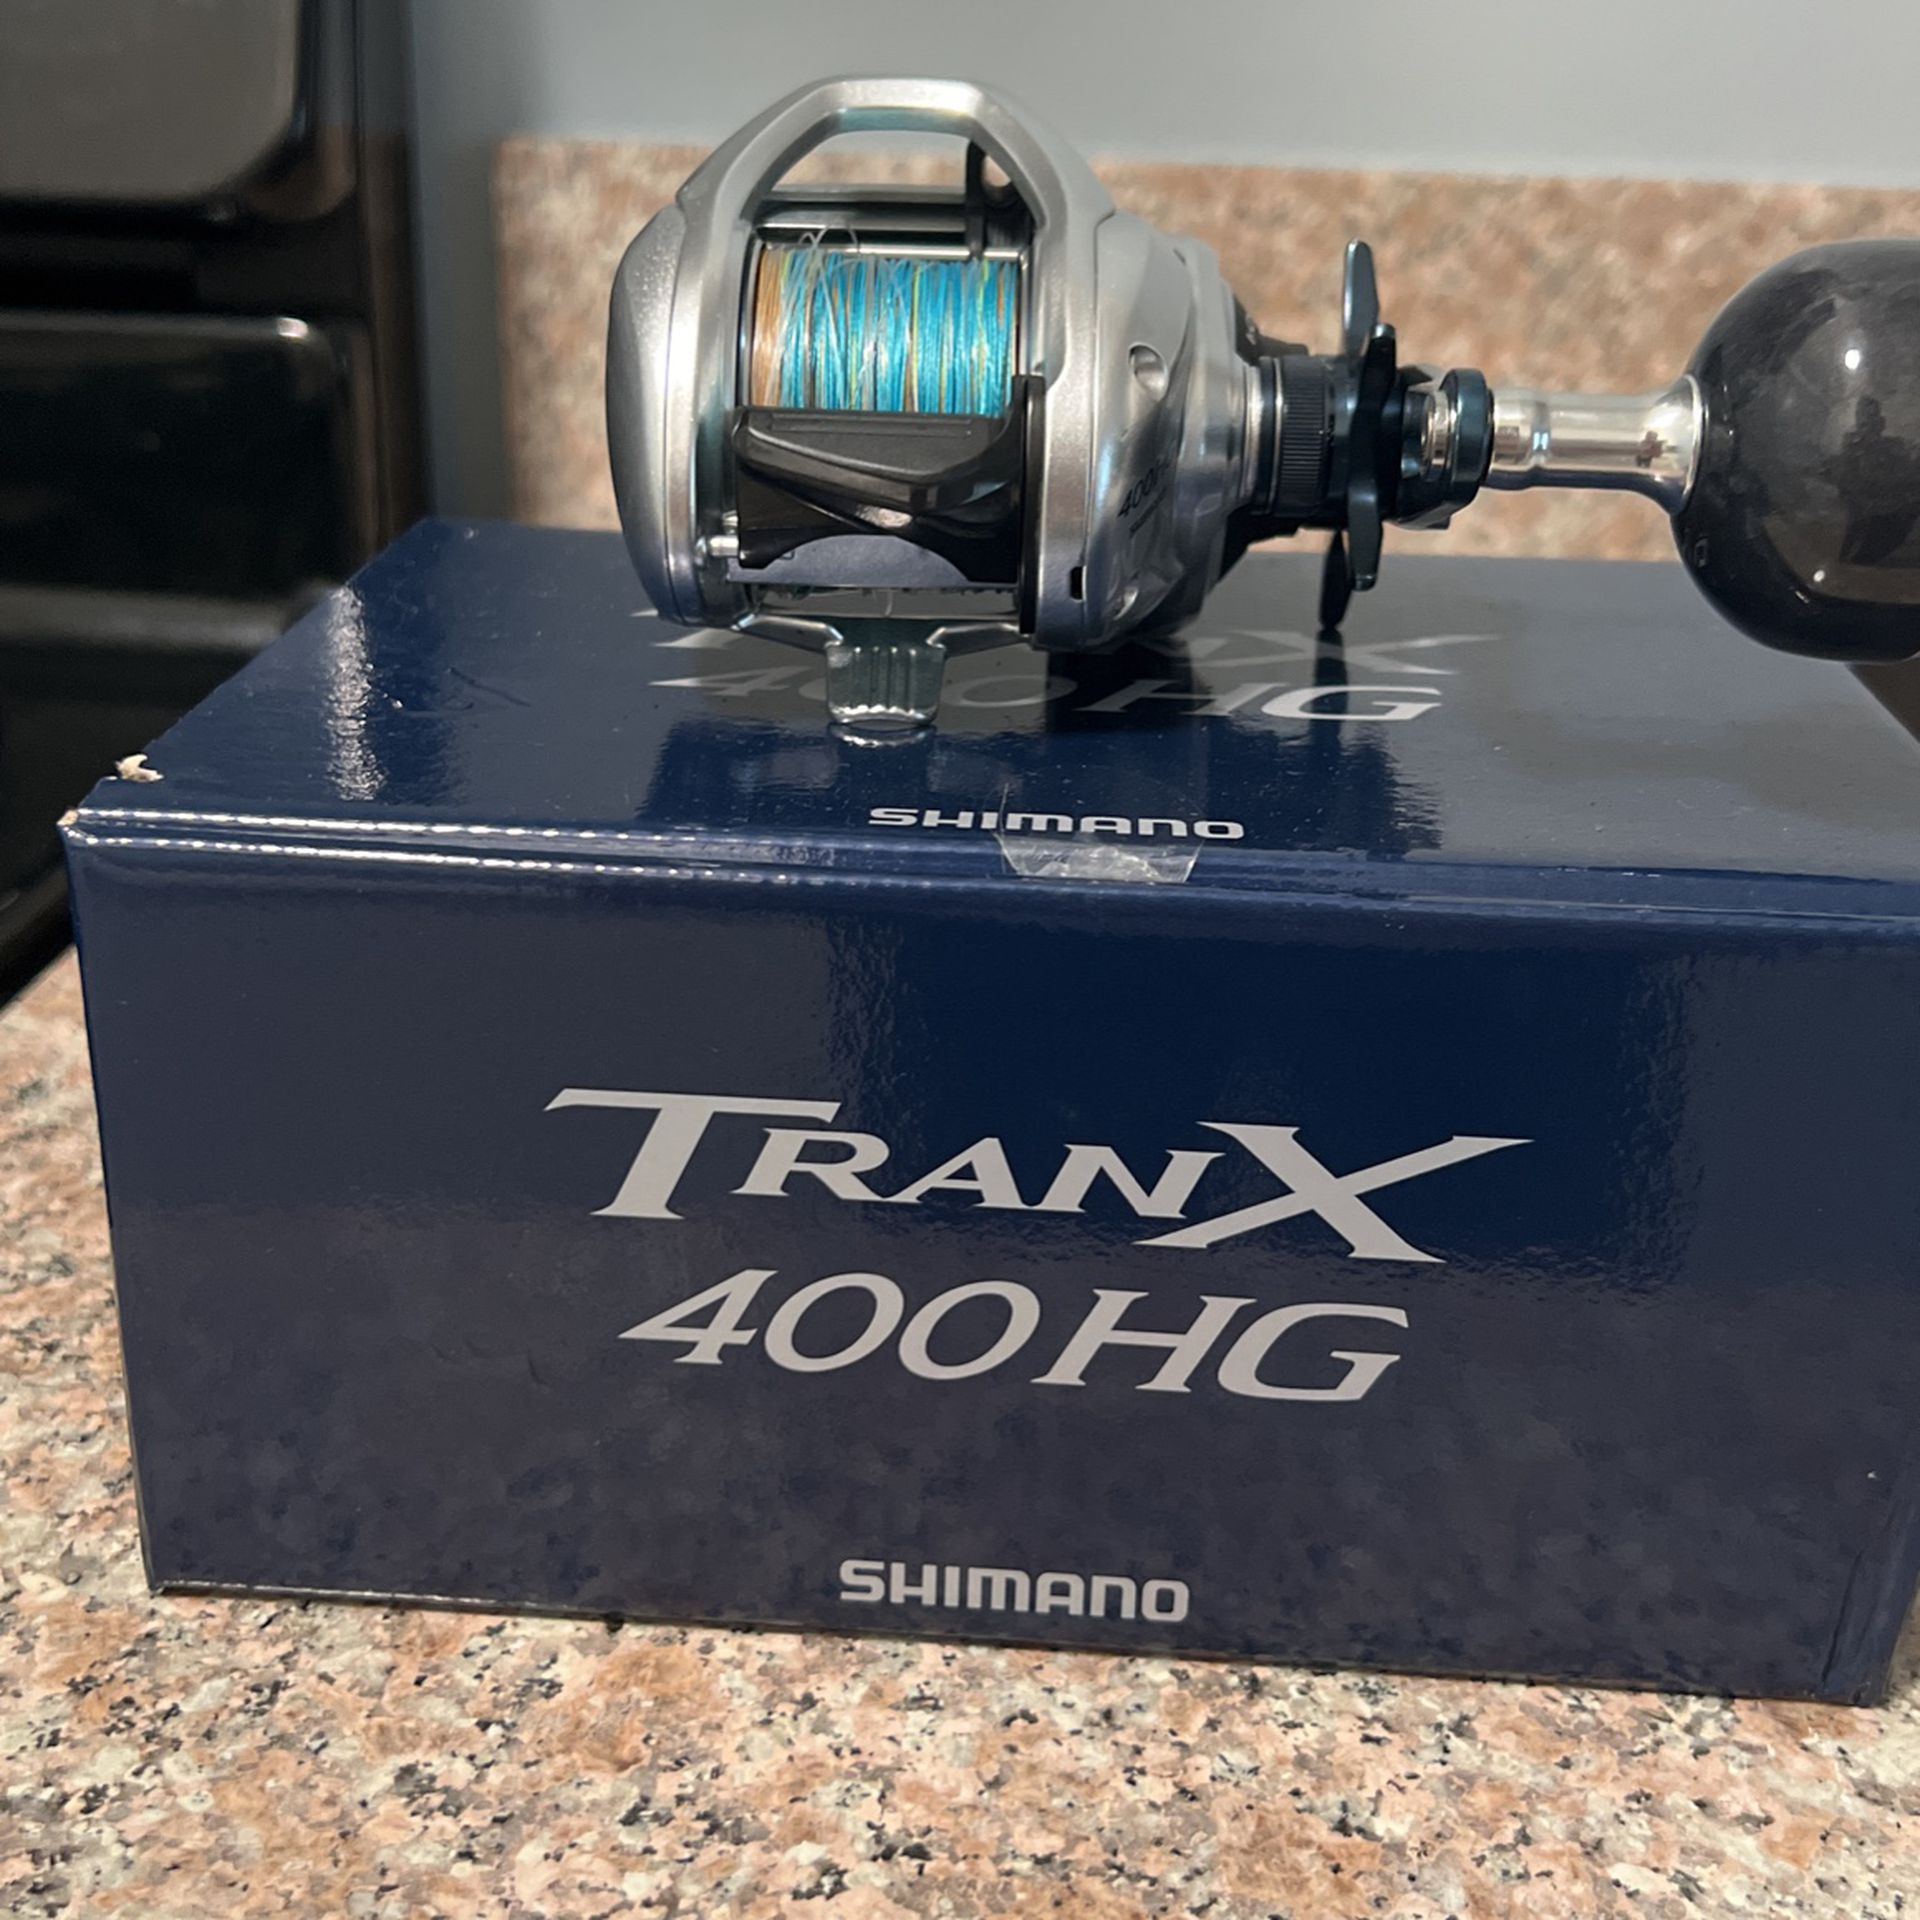 Tranx 400 Hg for Sale in Los Angeles, CA - OfferUp